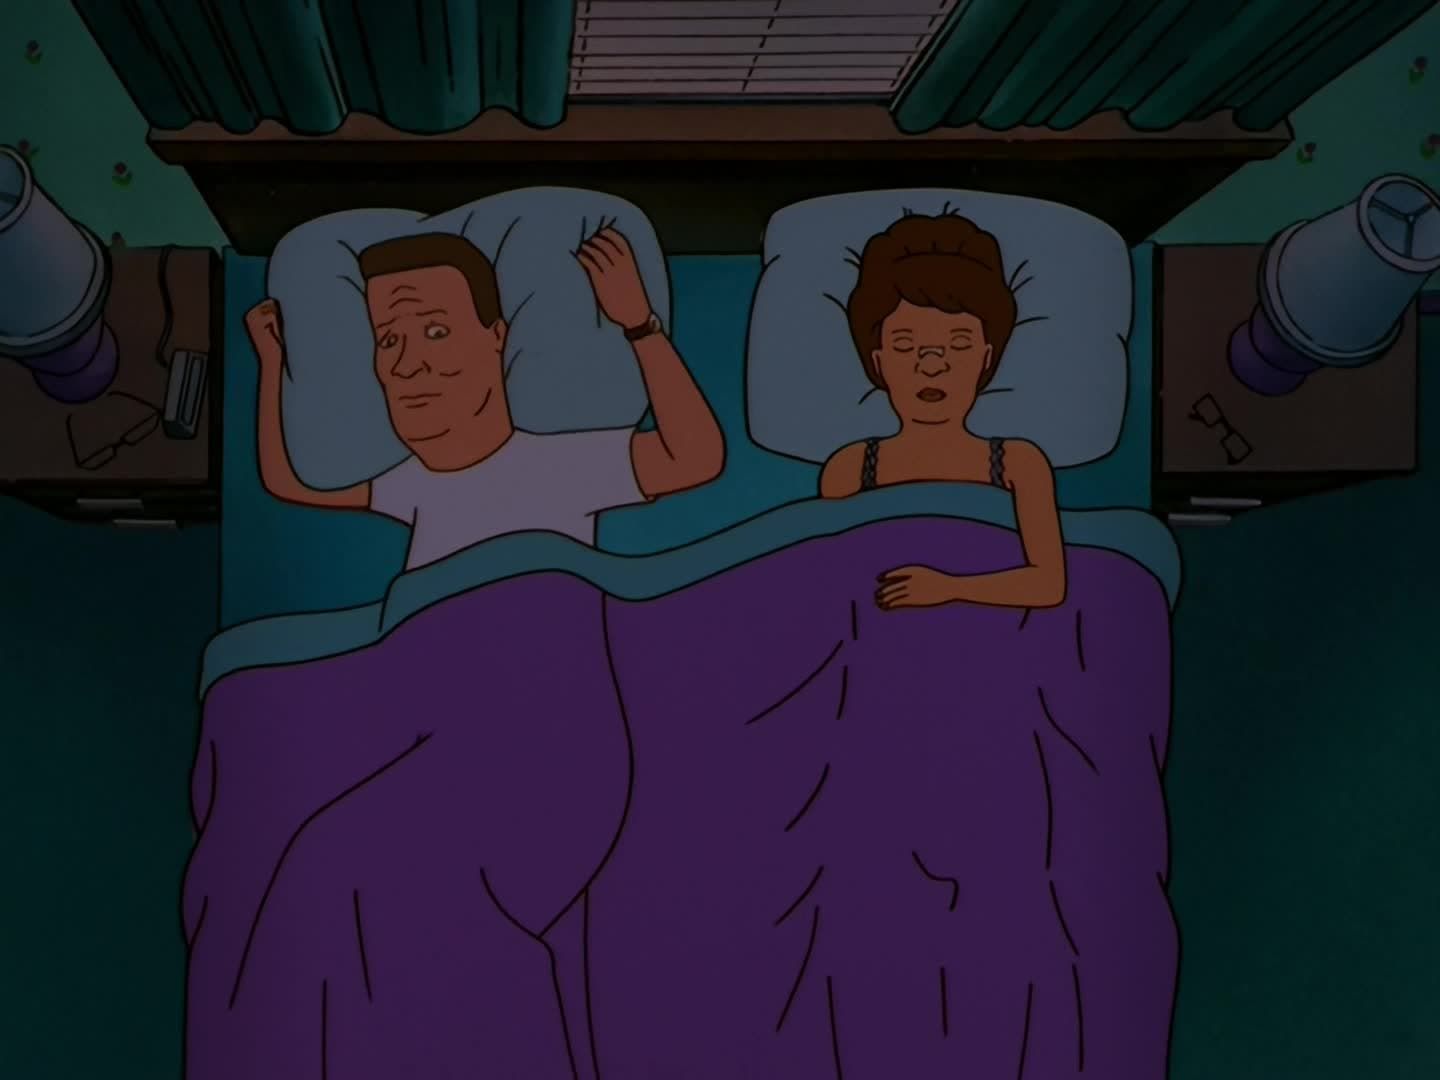 King of the Hill: Season 4  Where to watch streaming and online